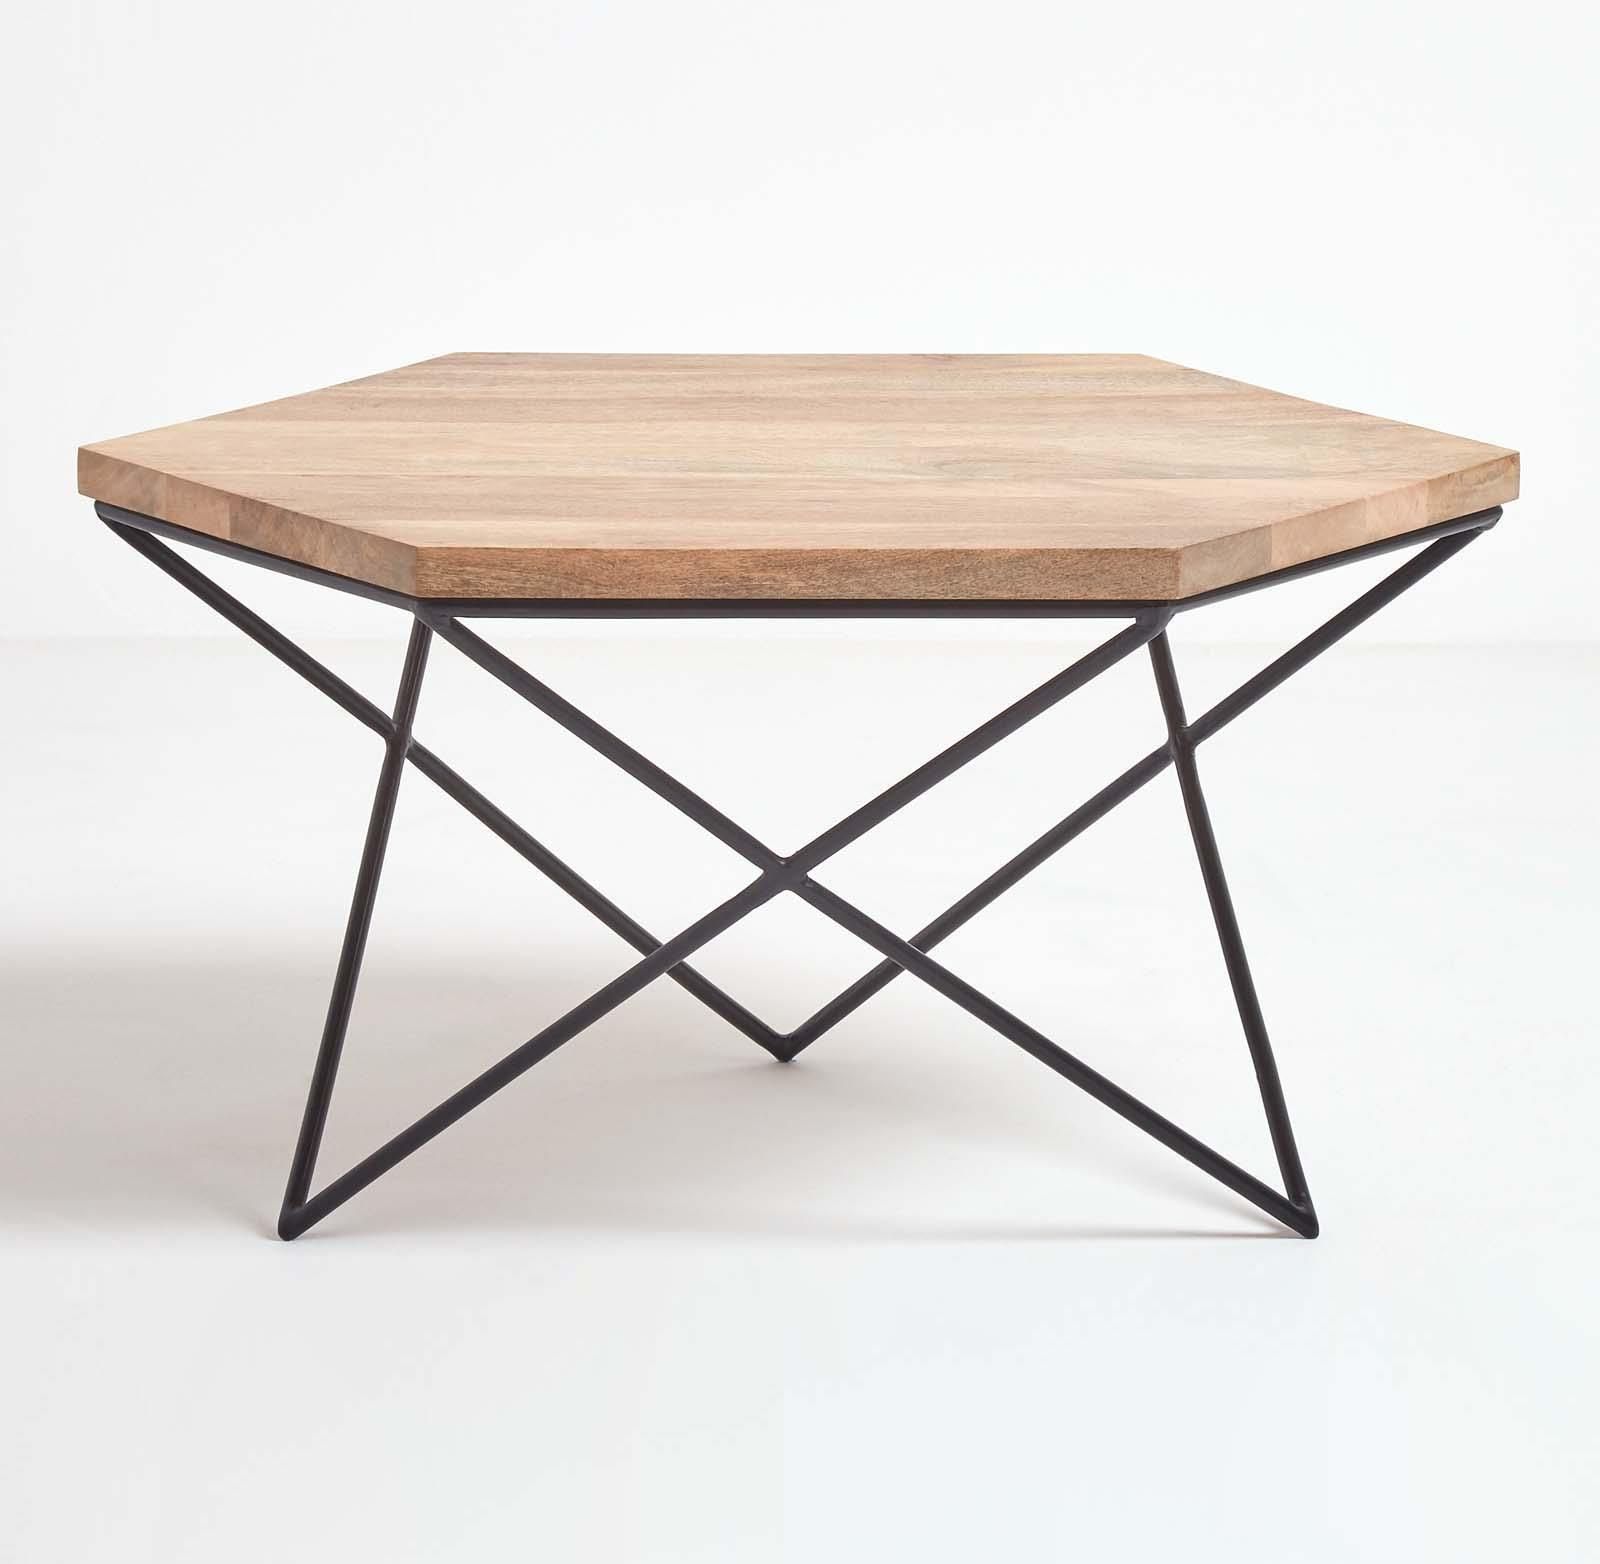 Orion Industrial Mango Wood Geometric Hexagon Coffee Table Within 2019 Geometric Coffee Tables (View 4 of 20)